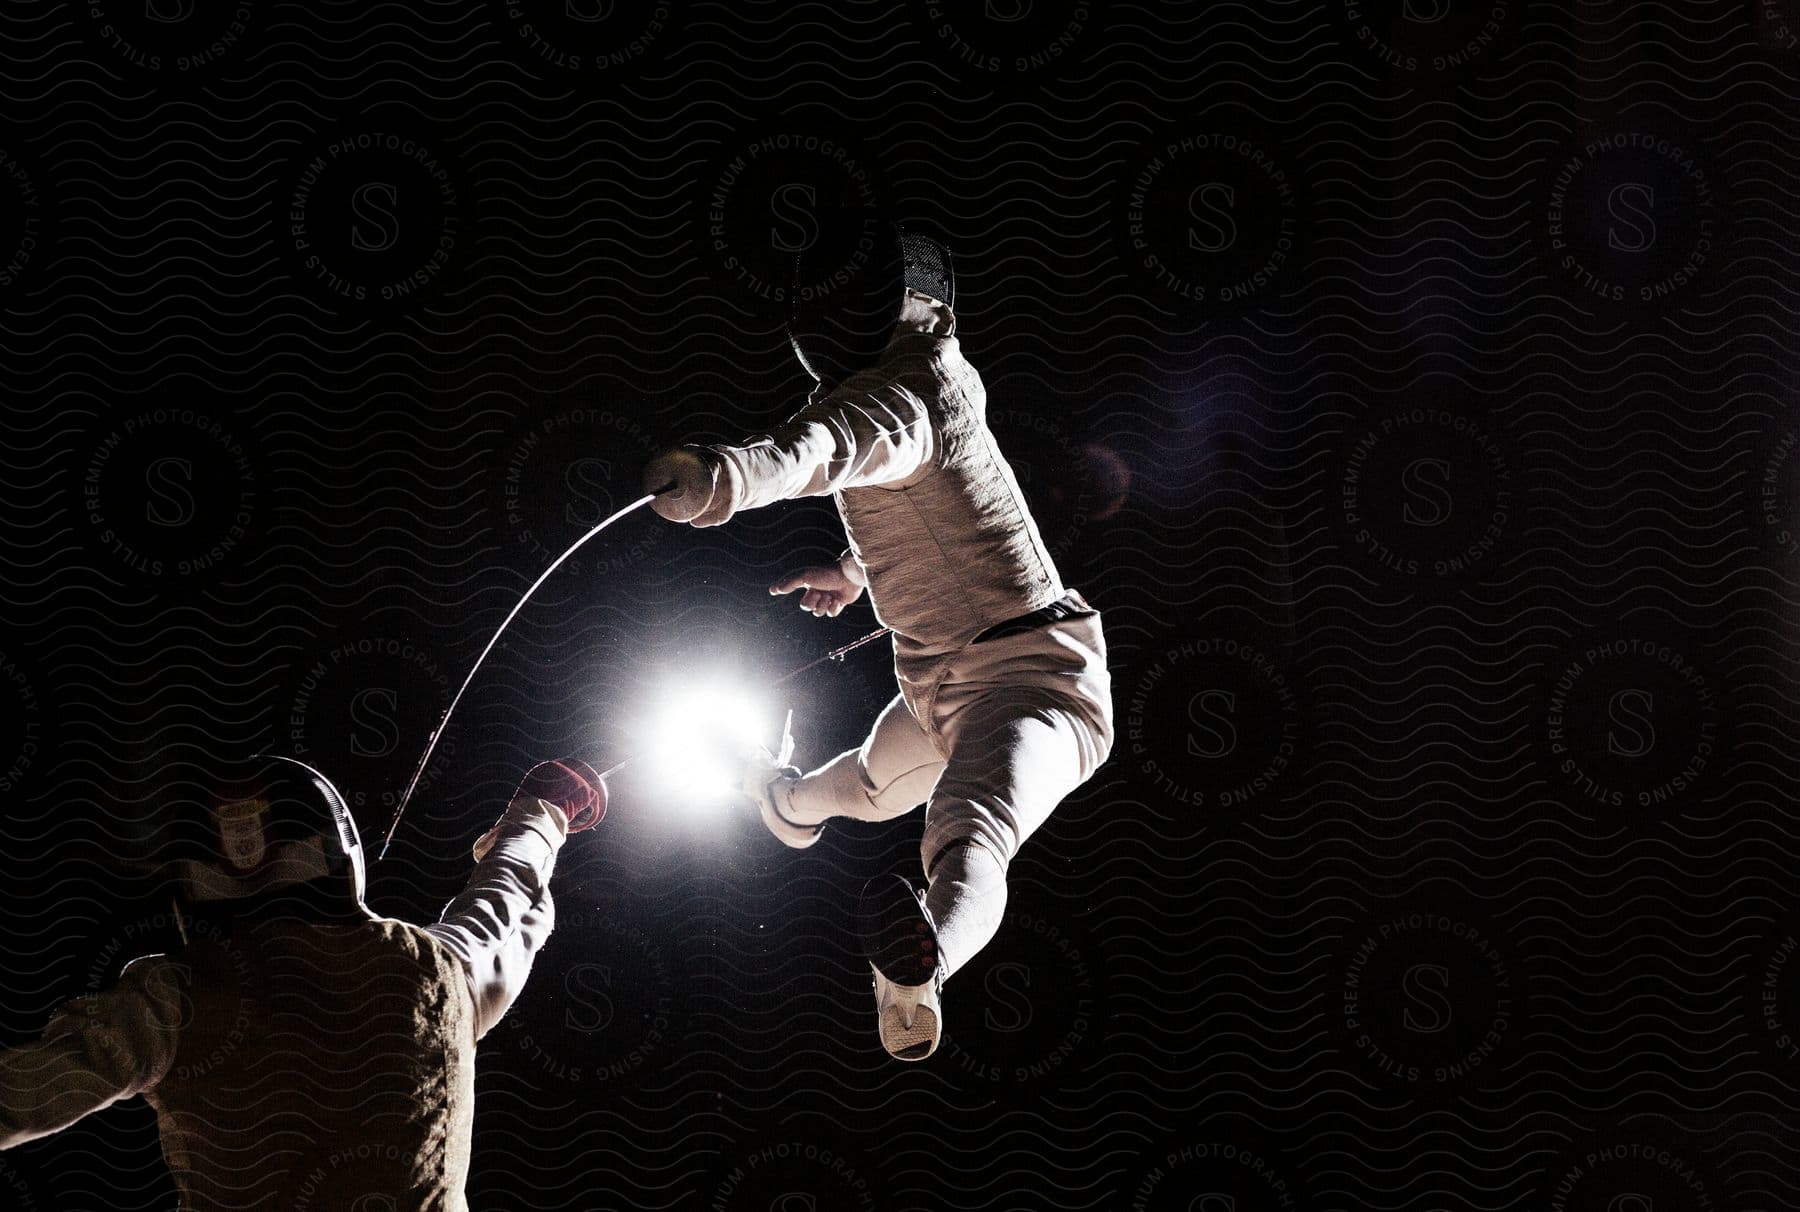 Stock photo of two people engage in combat at night wearing masks